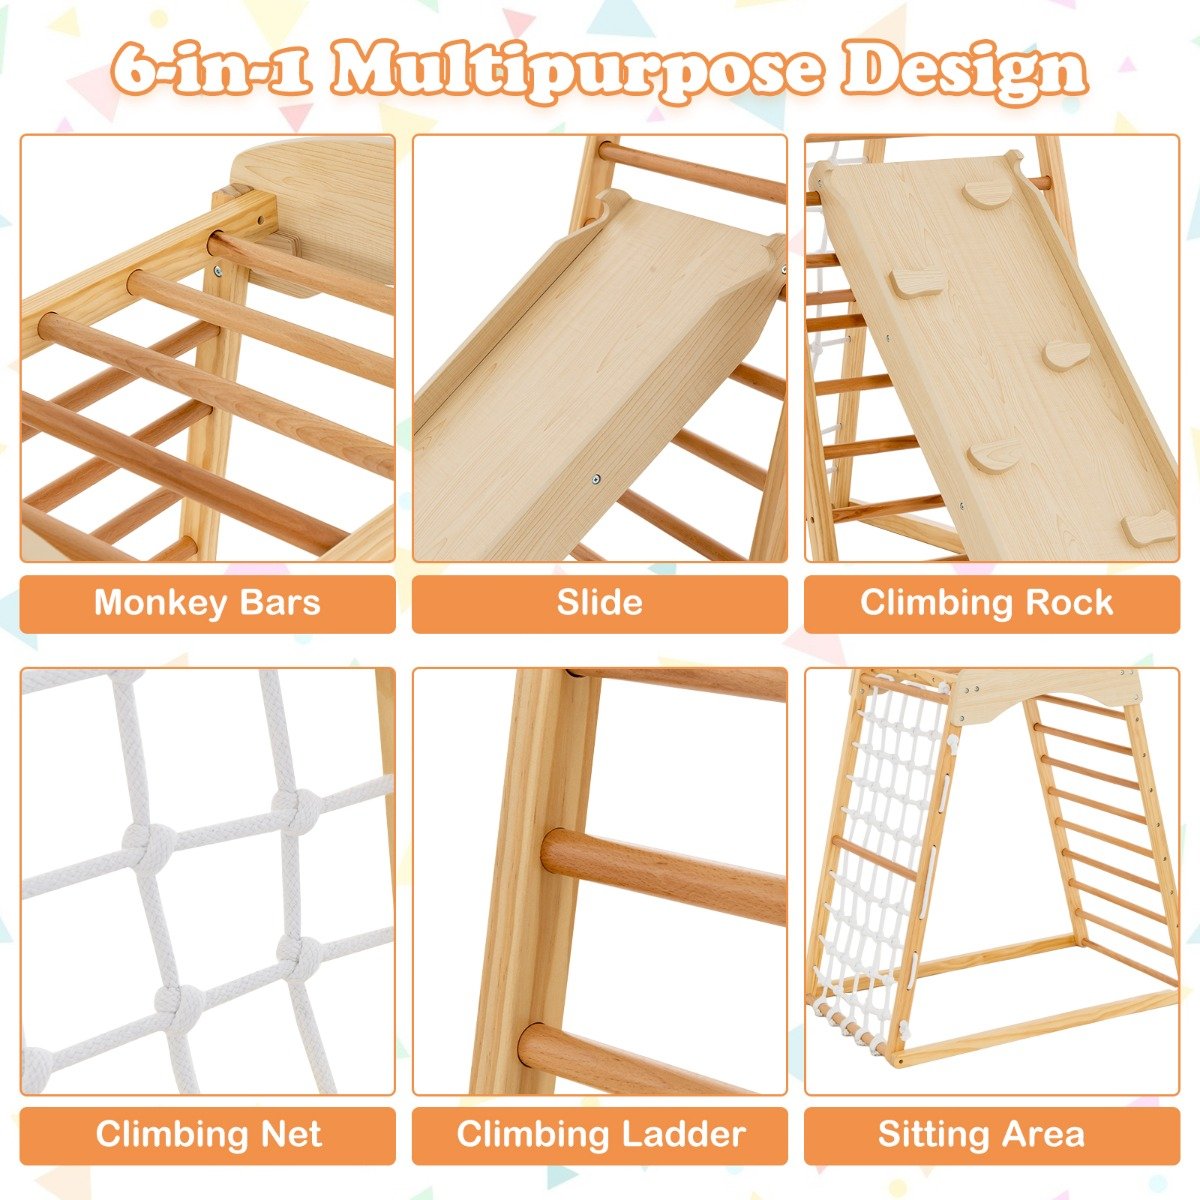 Double-Sided Ramp Jungle Gym for Creative Play